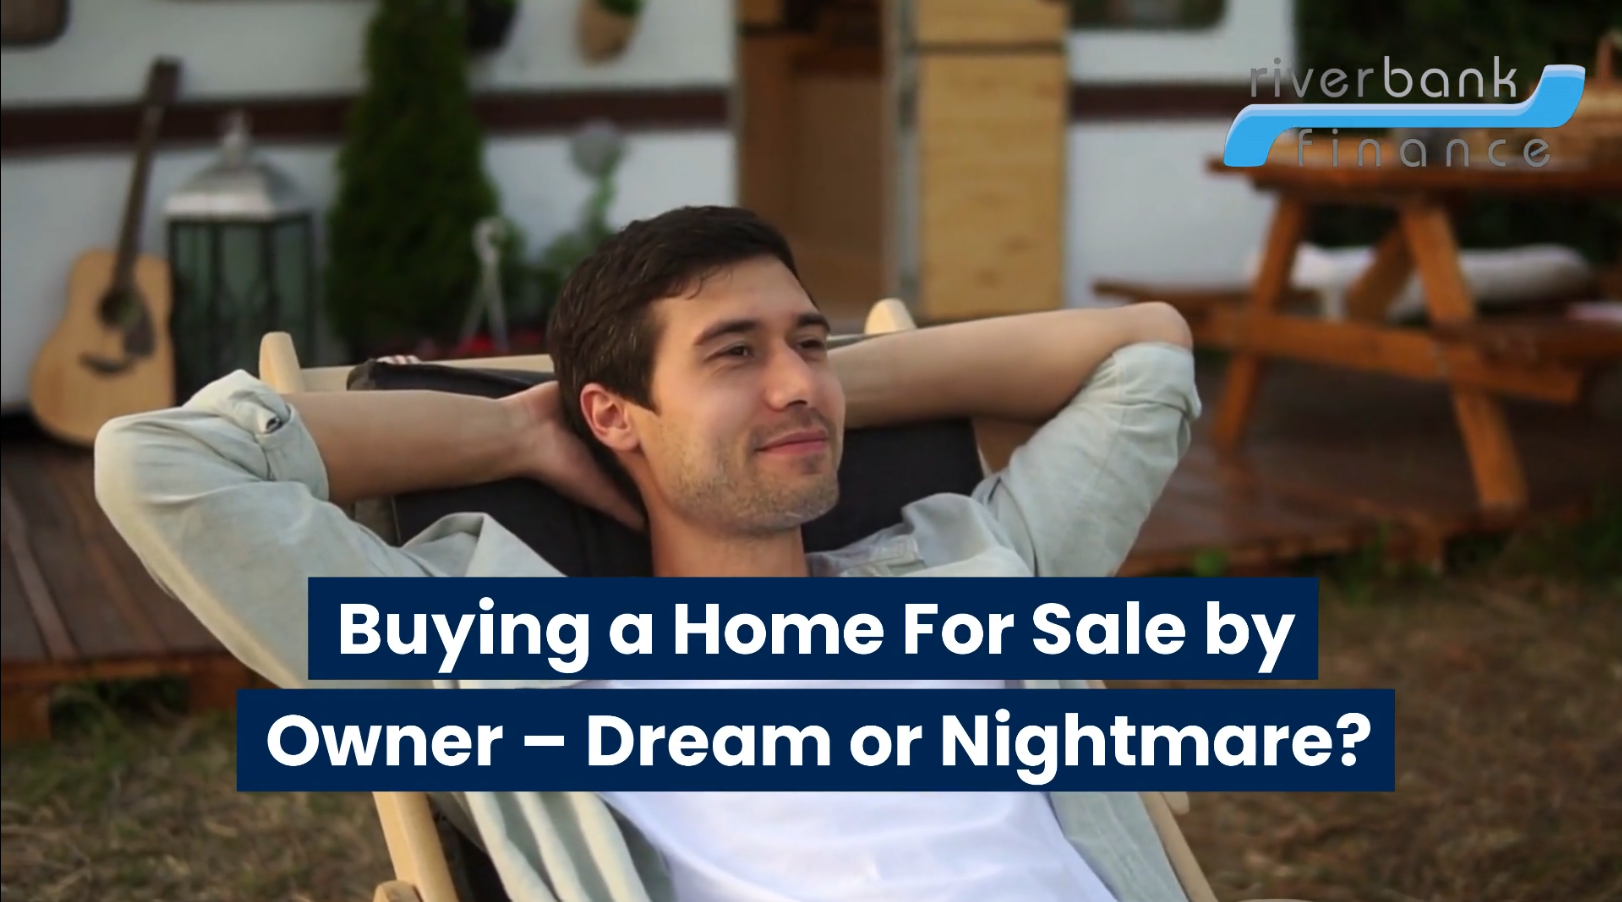 Buying a home FSBO - Dream or Nightmare?